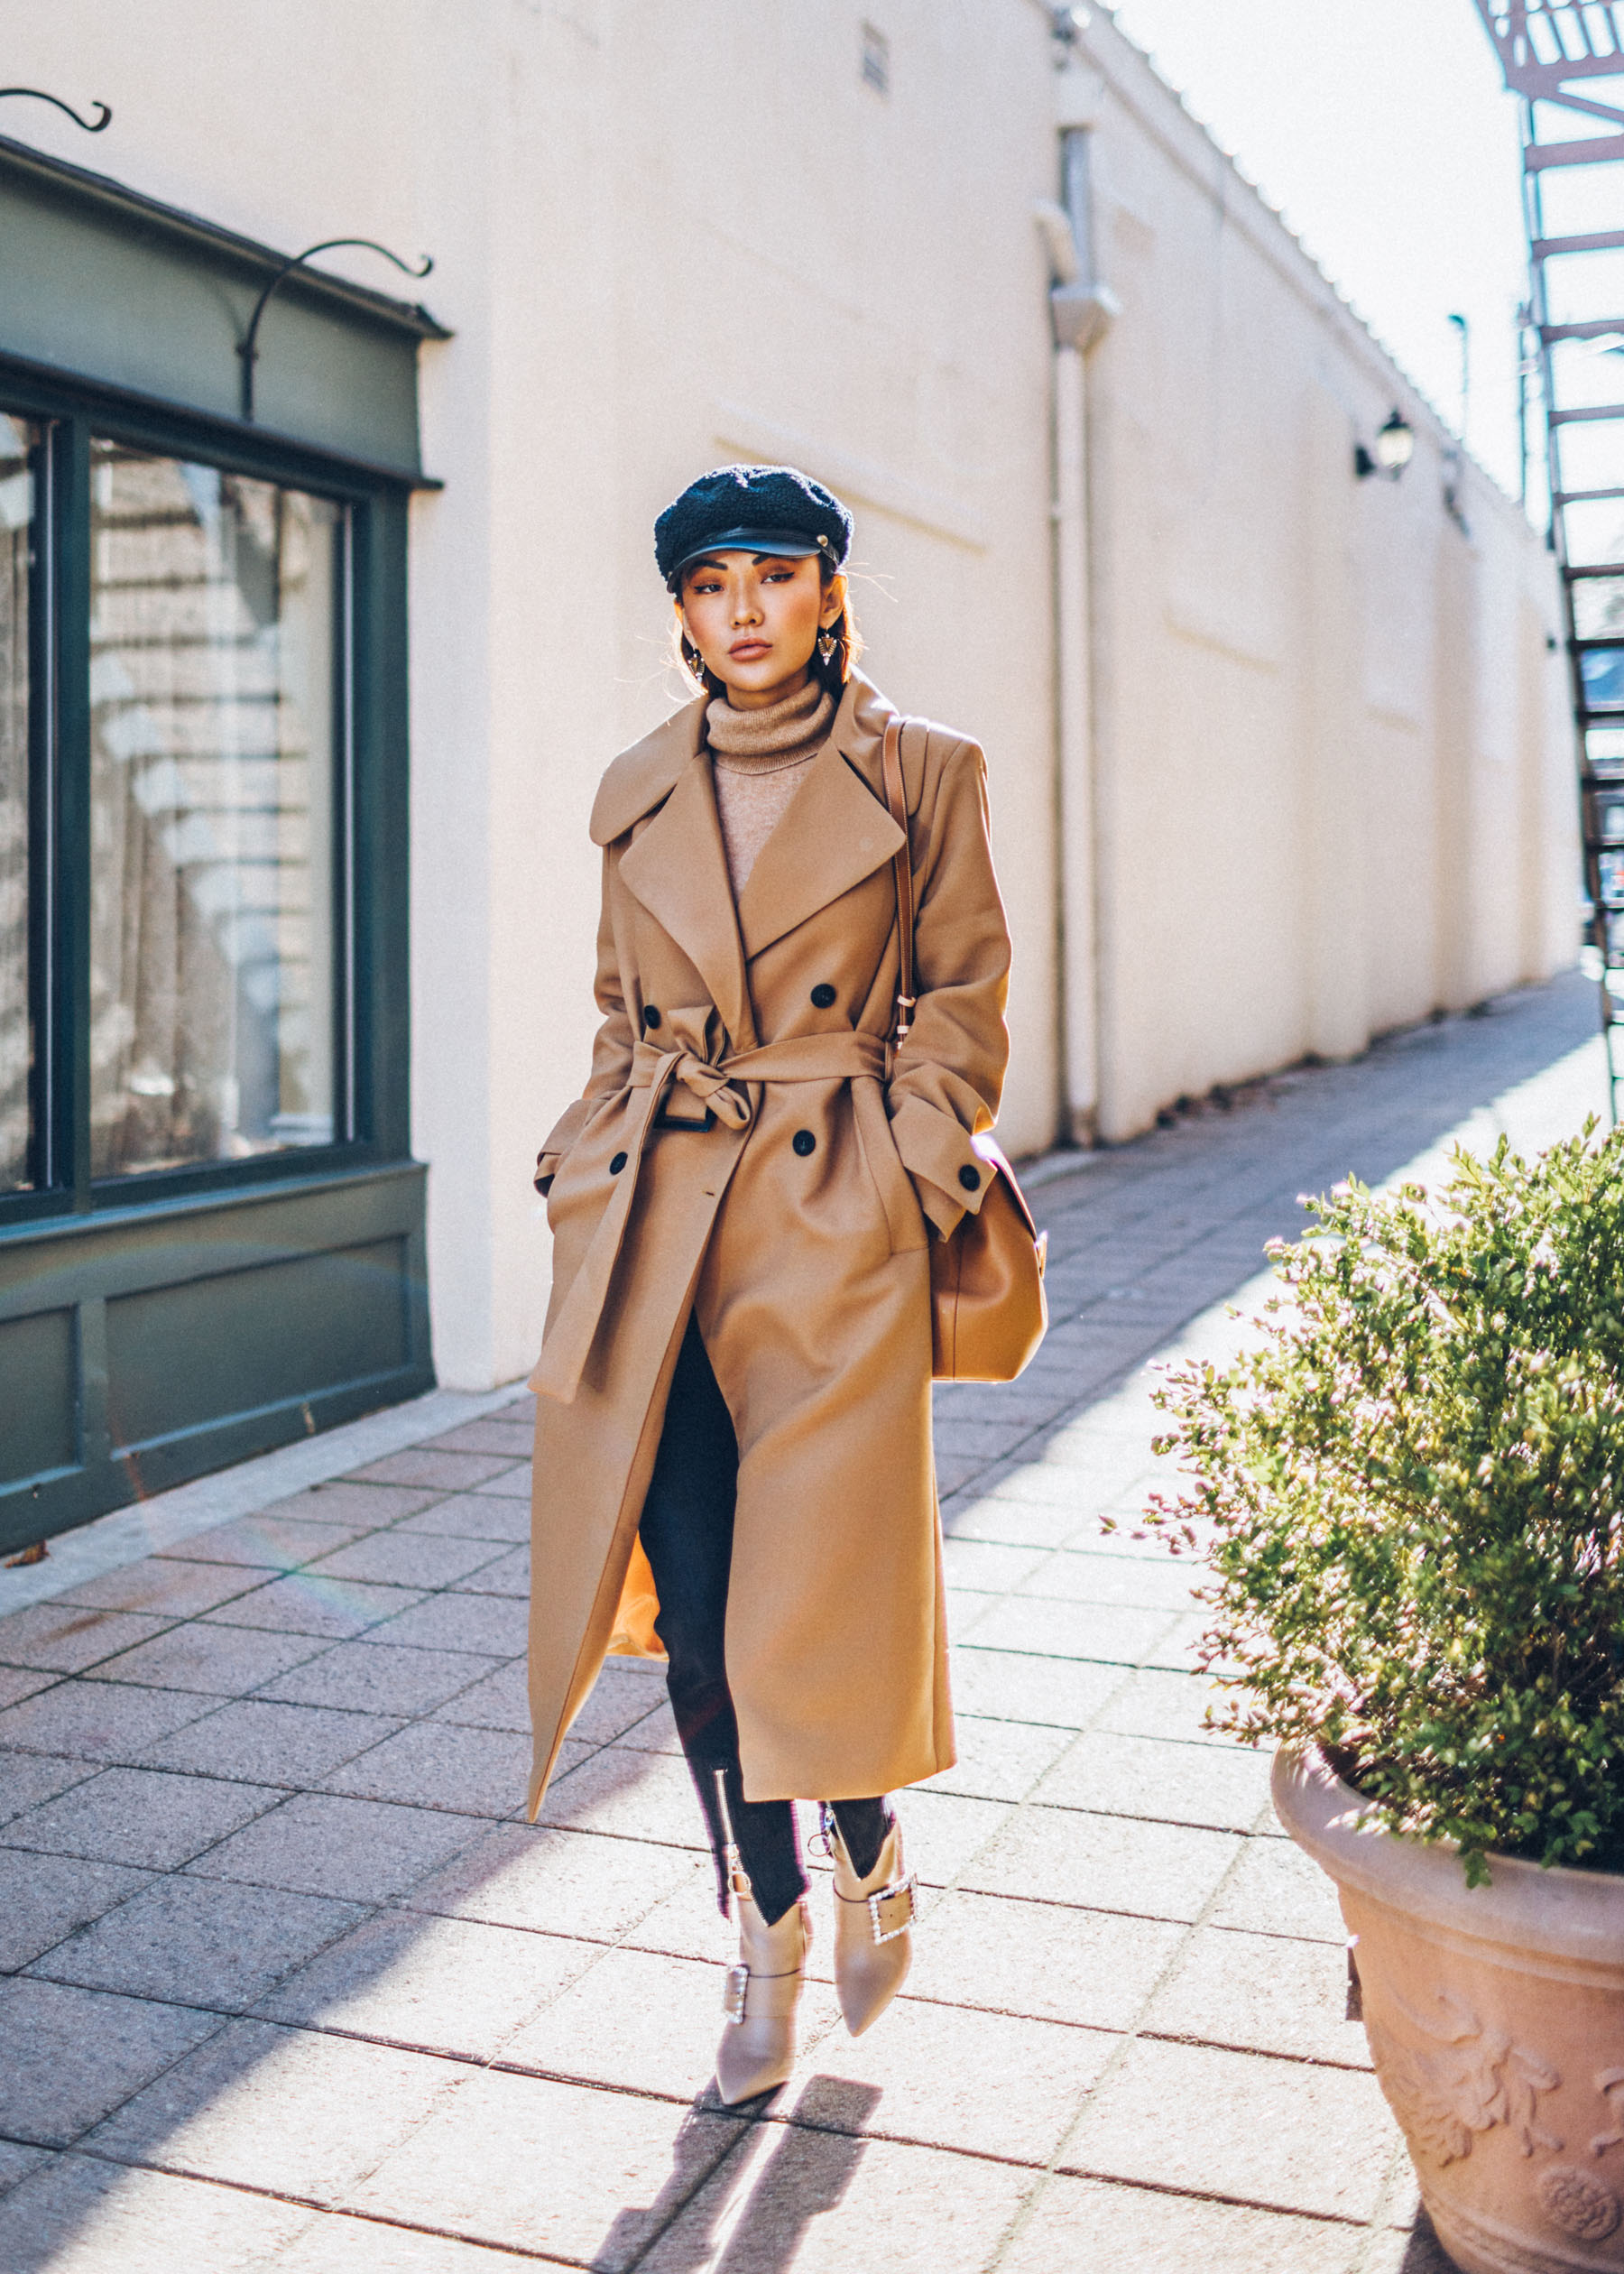 Holy Grail Coat Everyone Must Own - Camel Coat with Tan Turtleneck Sweater // Notjessfashion.com